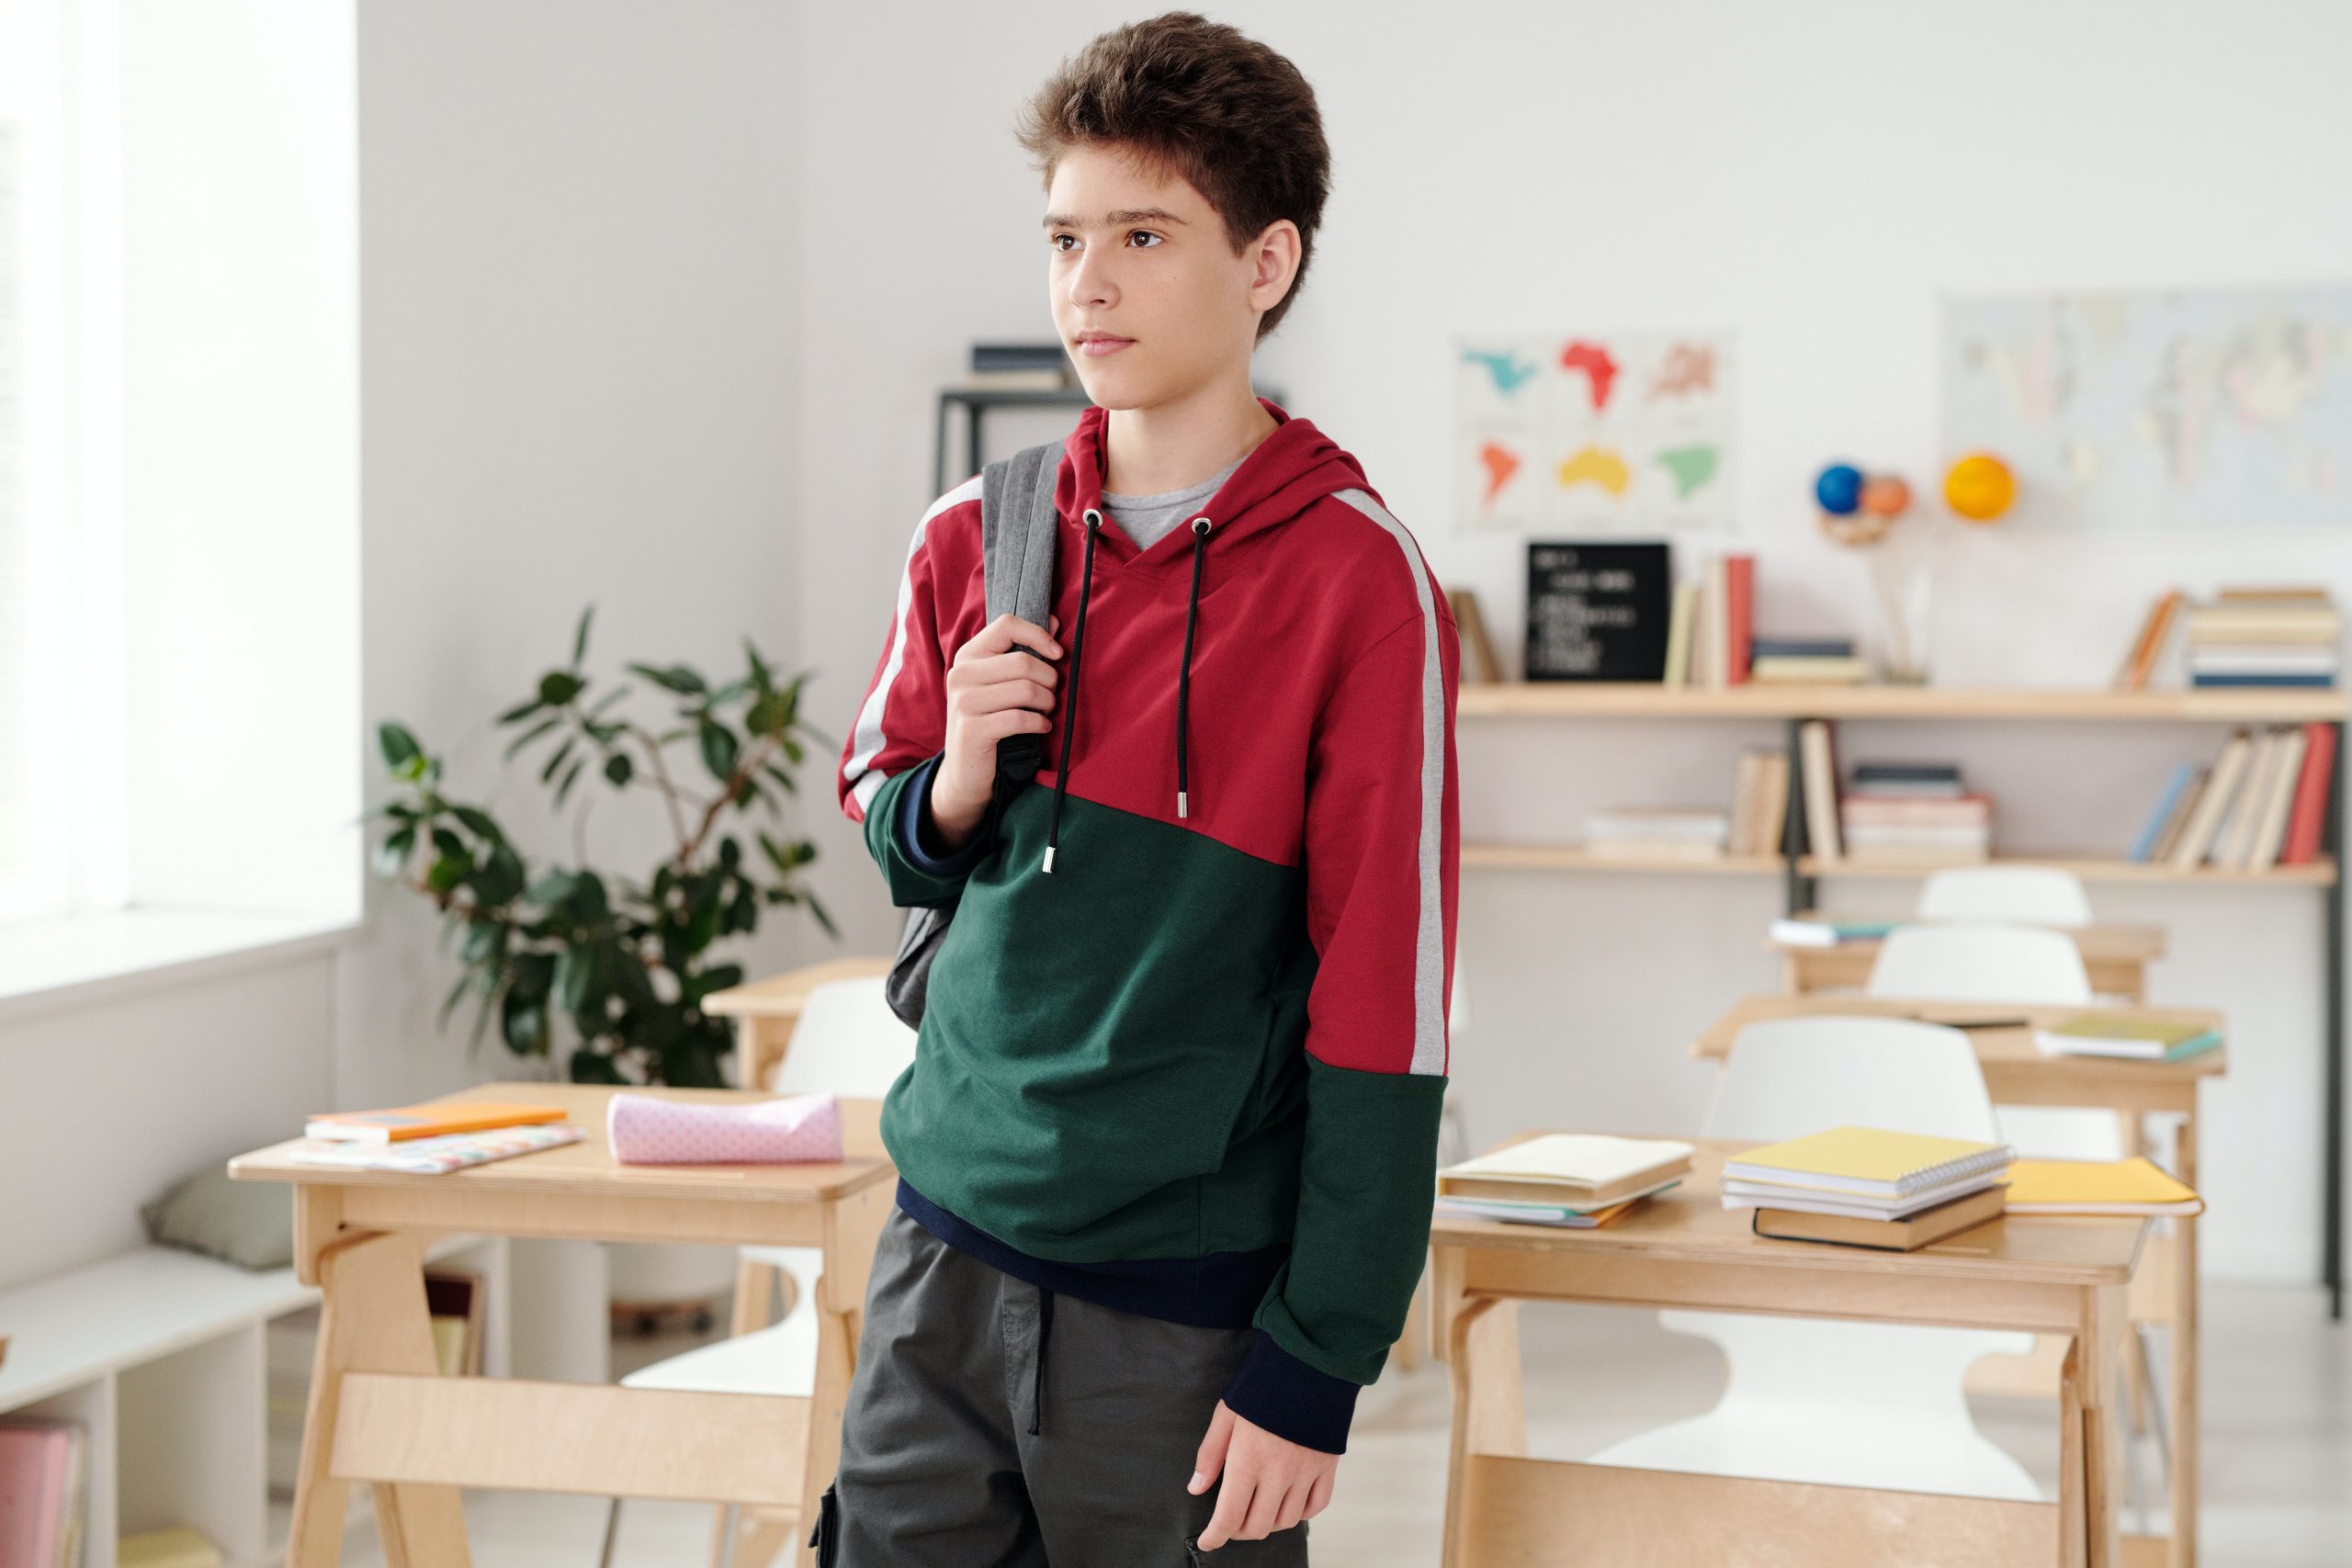 Teenage boy with backpack standing in a classroom with maps and books in the background. 